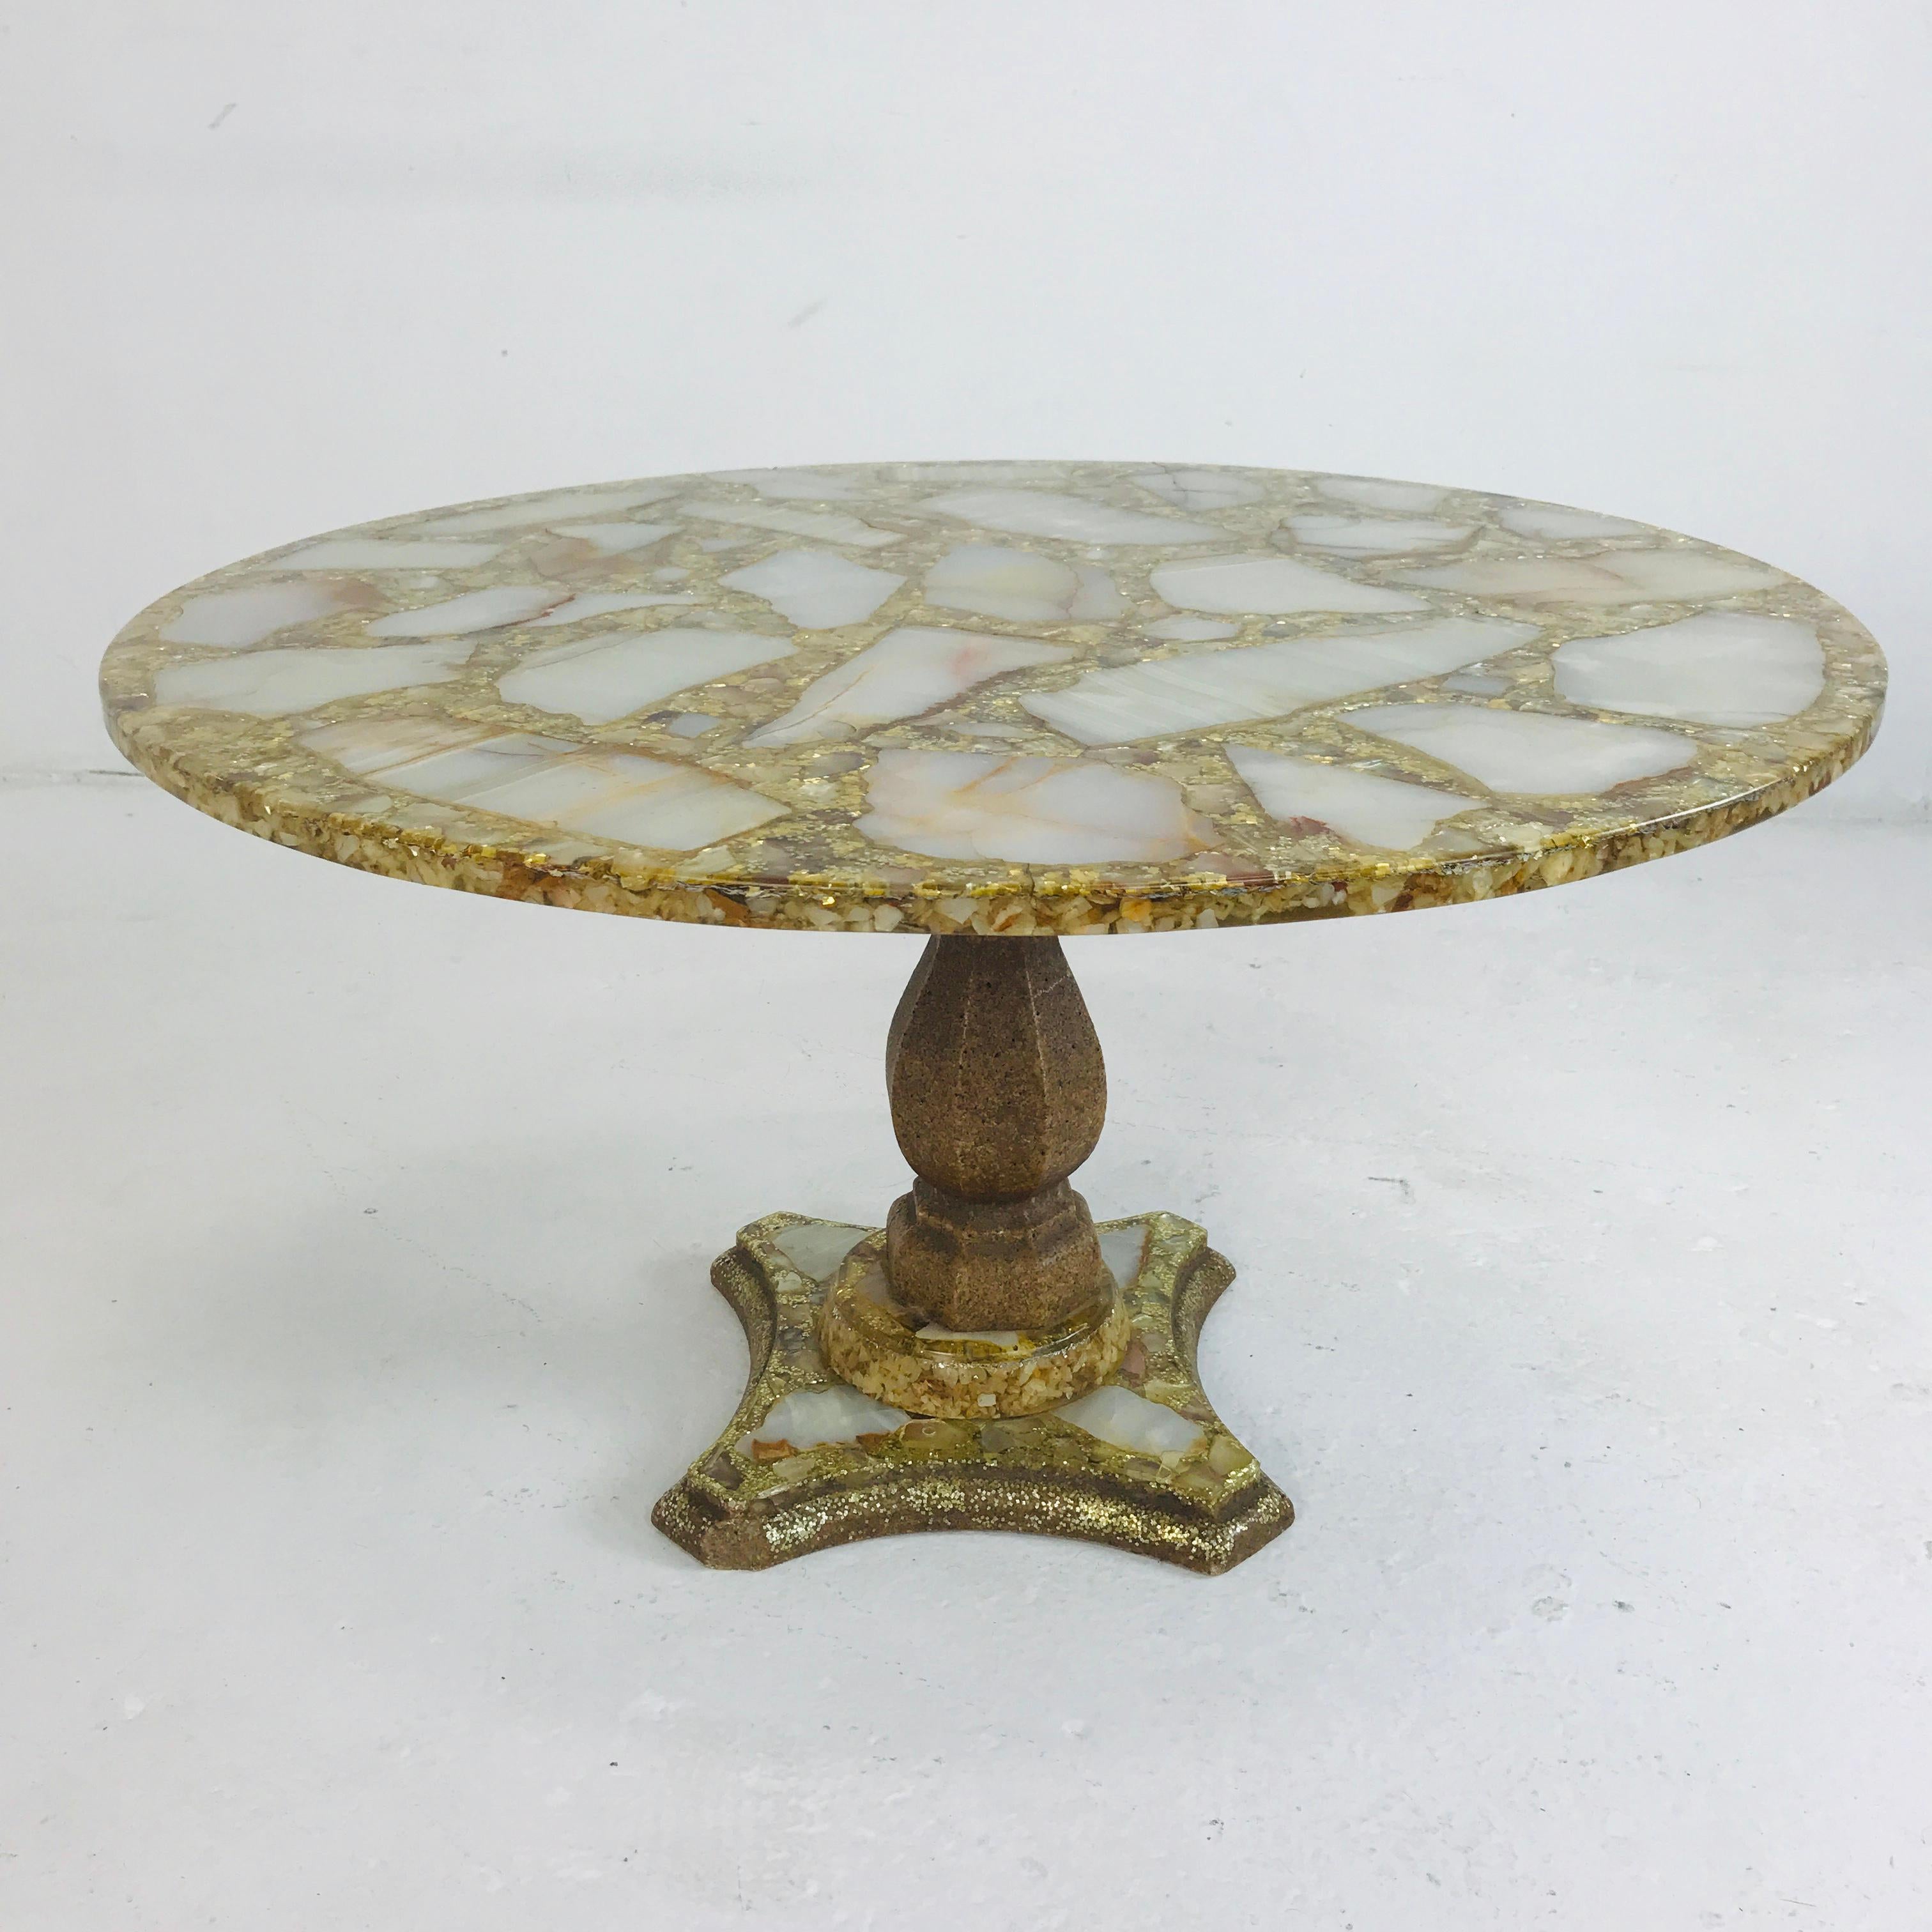 These tables feature cross sections of cream and copper colored onyx stone floating in a sea of gold glitter and abalone shells cast in resin. Table tops measure 20